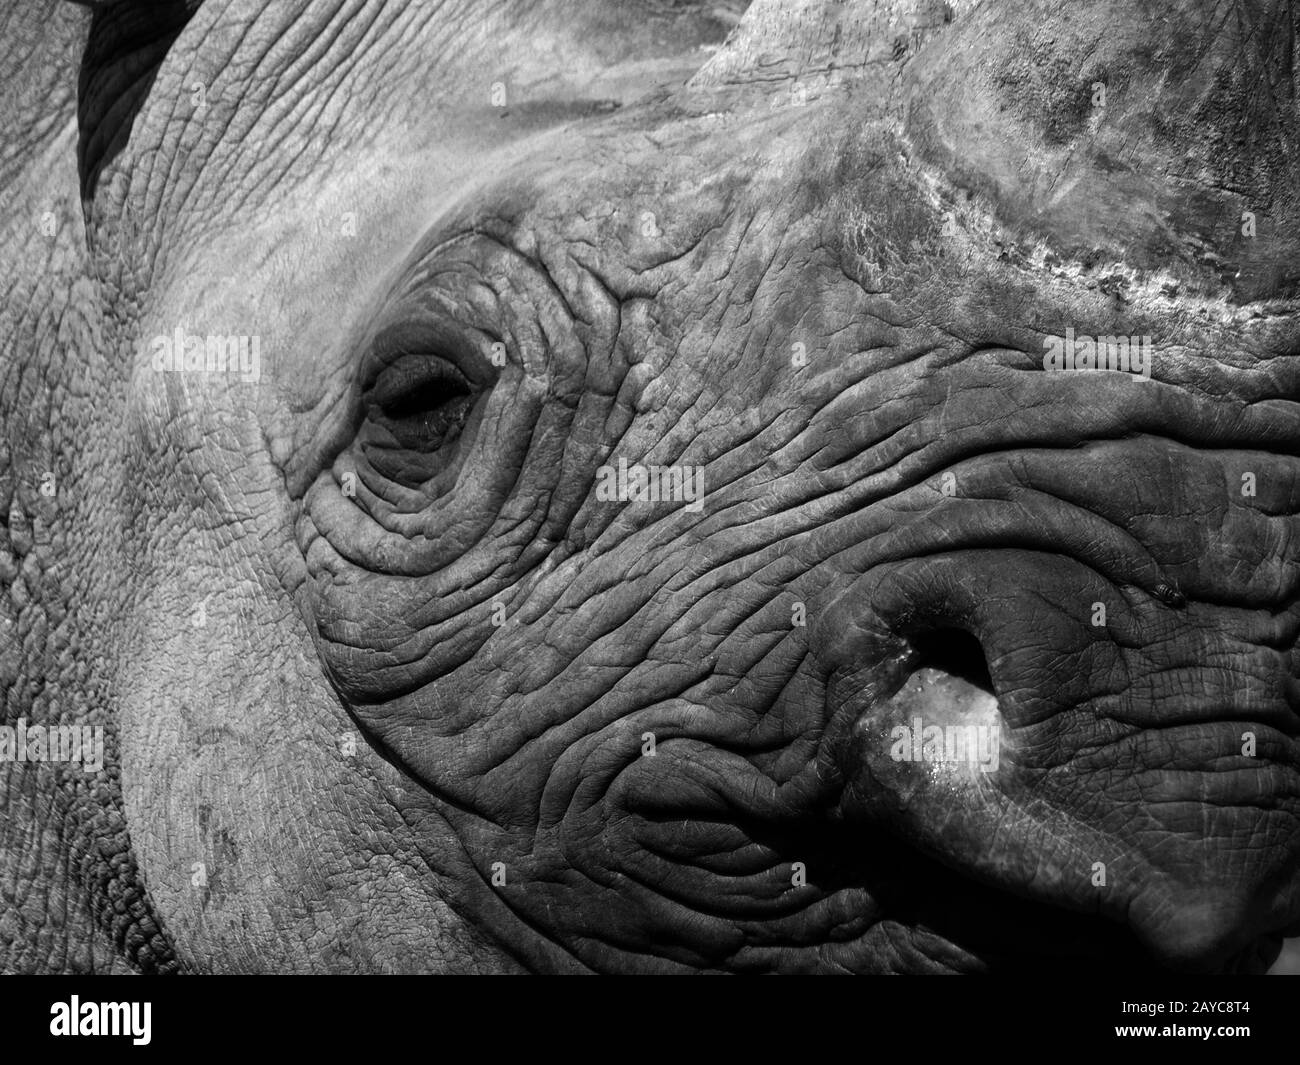 a monochrome close up of the face of a black rhinoceros with eye nose and horn Stock Photo